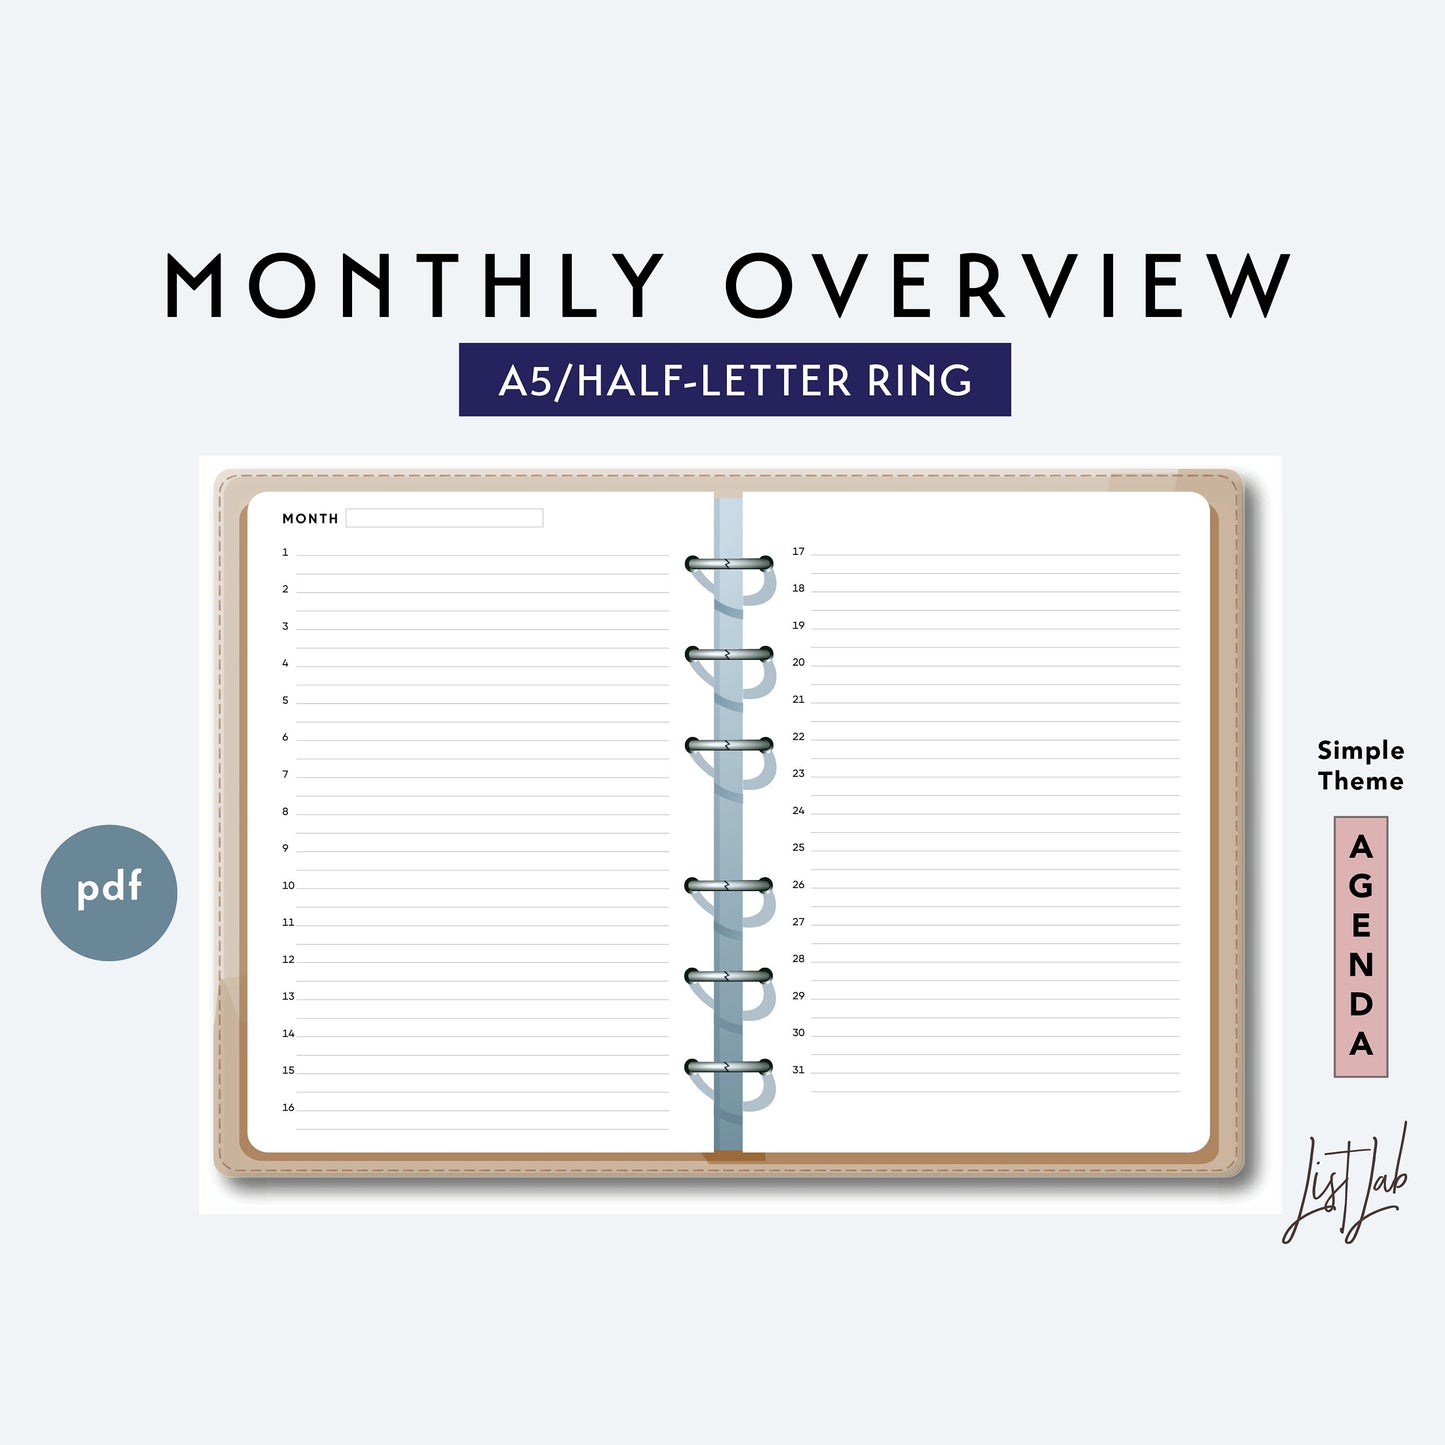 A5 and Half-Letter Ring MONTHLY OVERVIEW Printable Set